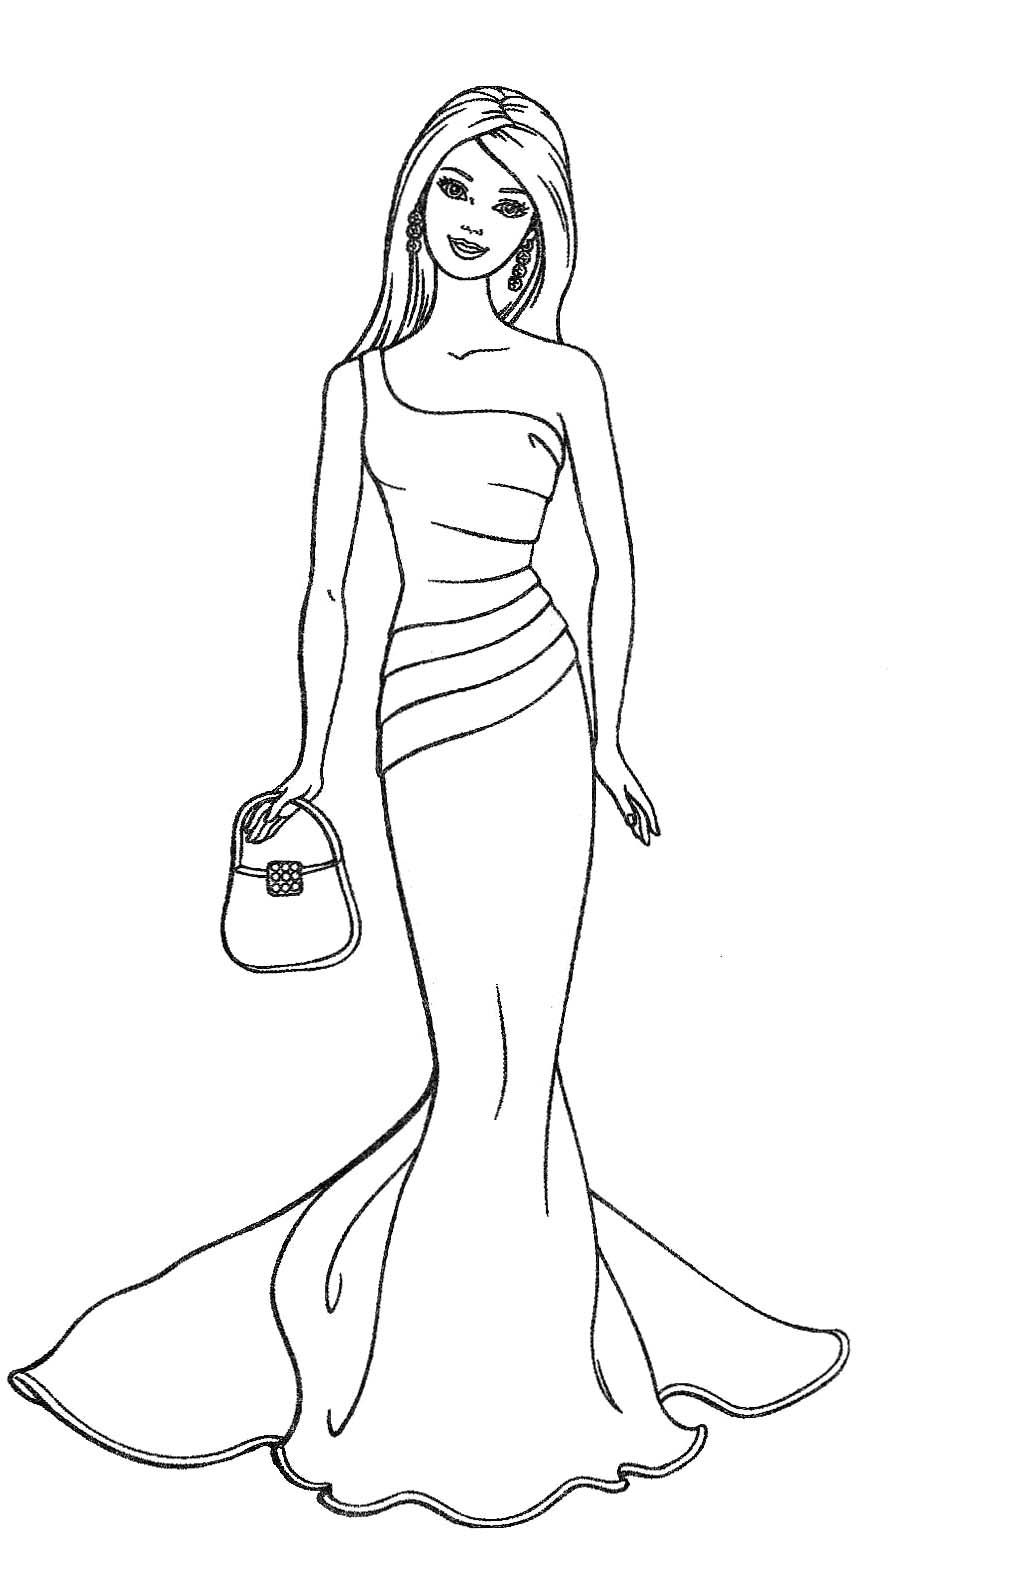 barbie fashion coloring page | Only Coloring Pages